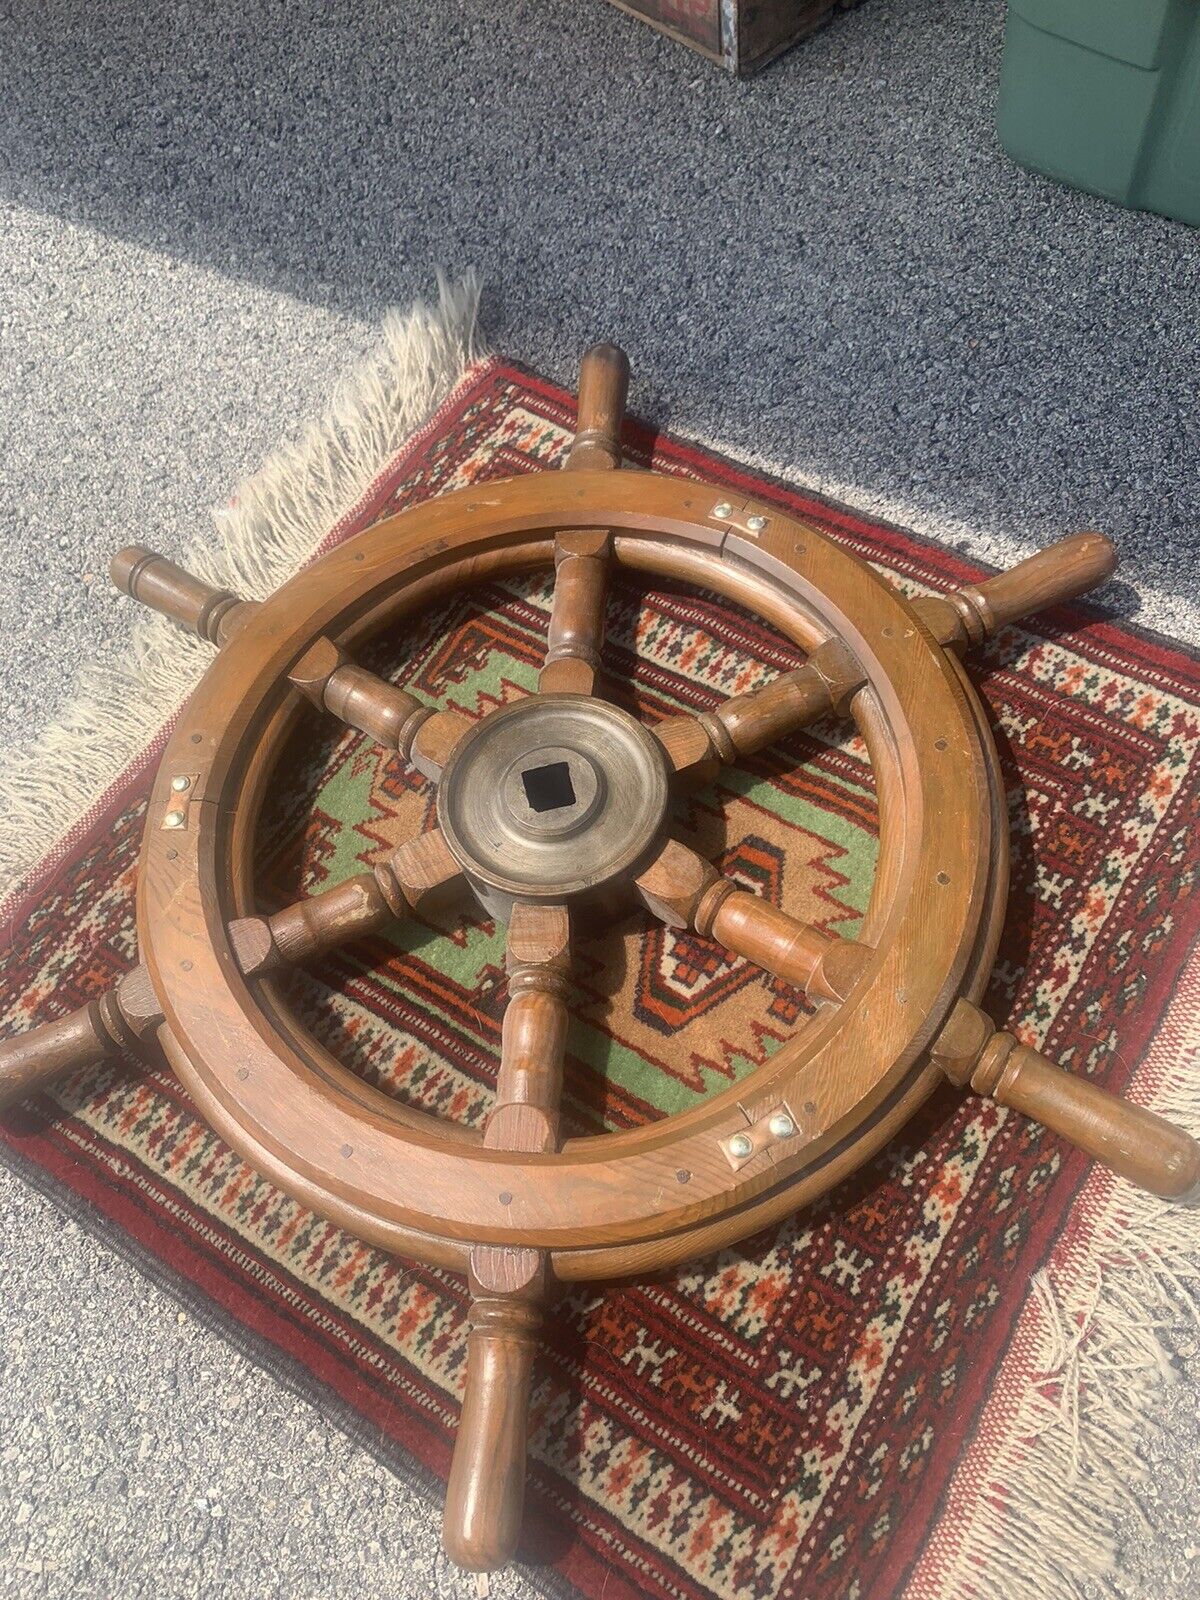 24" Nautical Wooden Ship Steering Wheel Pirate Décor Handmade Vintage Wall Boat